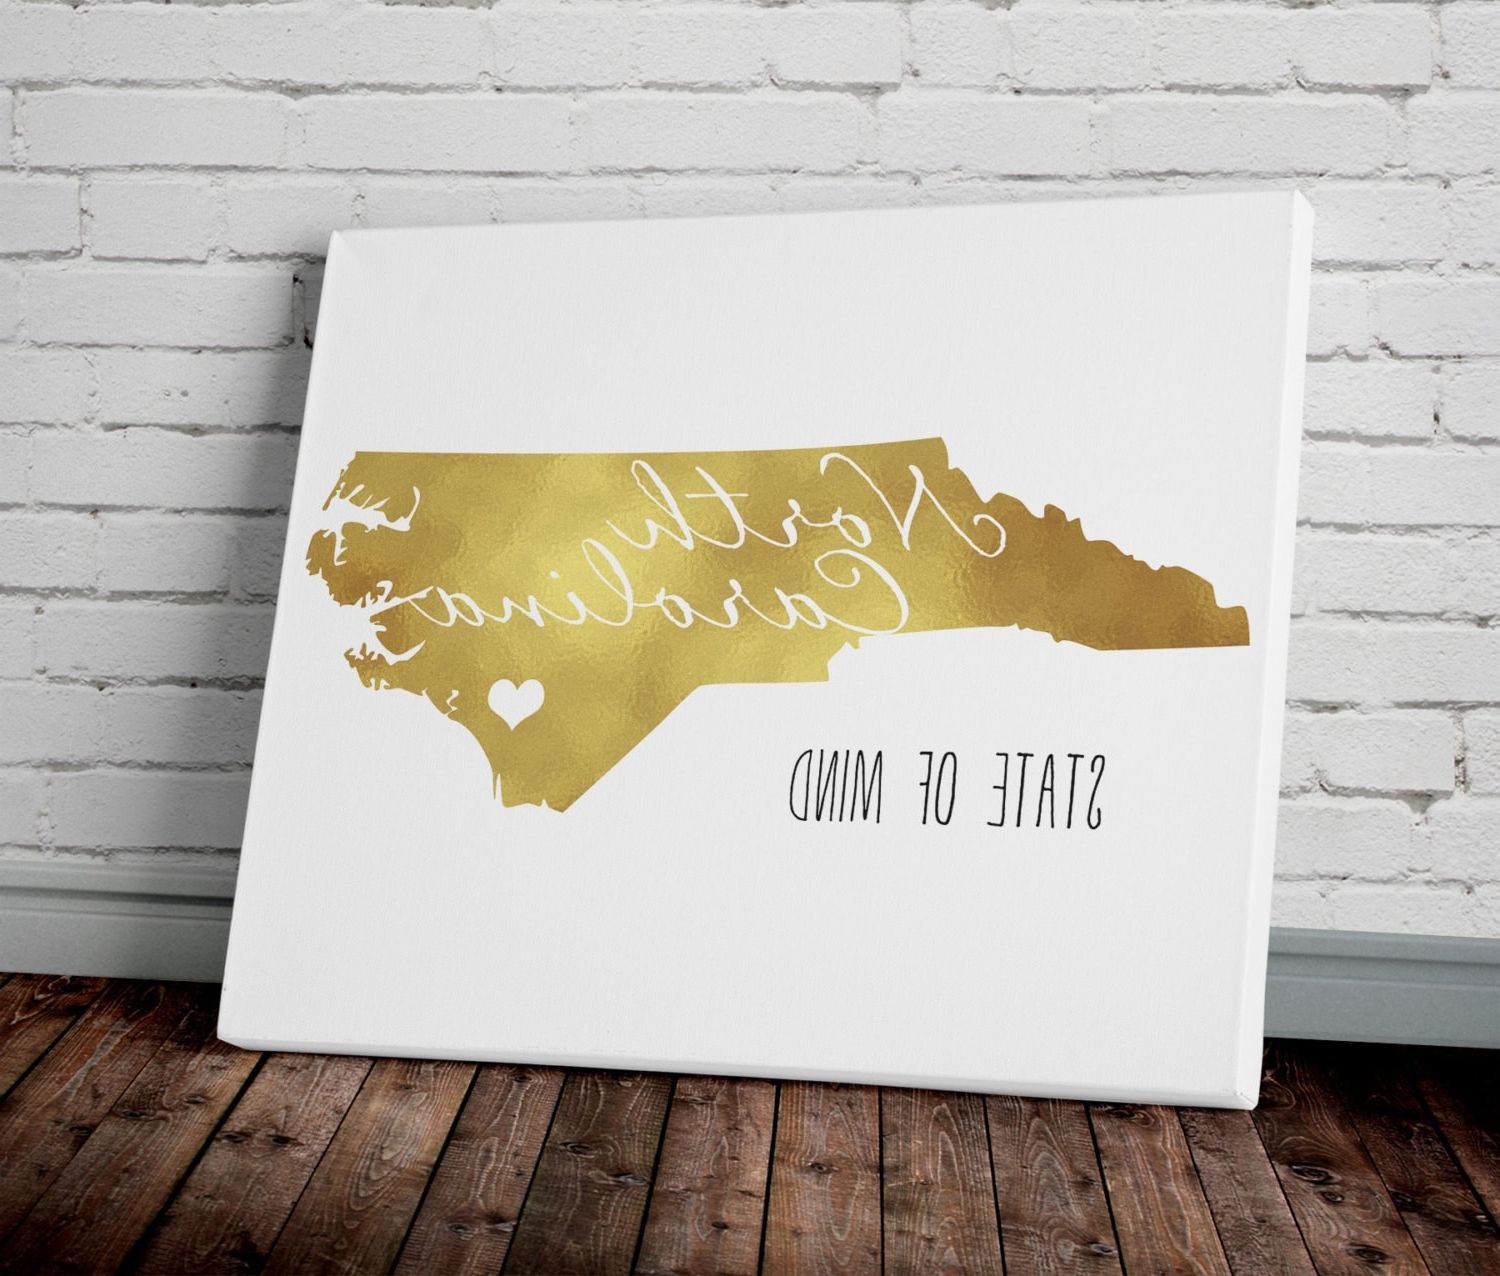 North Carolina Wall Art Intended For Most Popular North Carolina Wall Art – Arsmart (View 1 of 20)